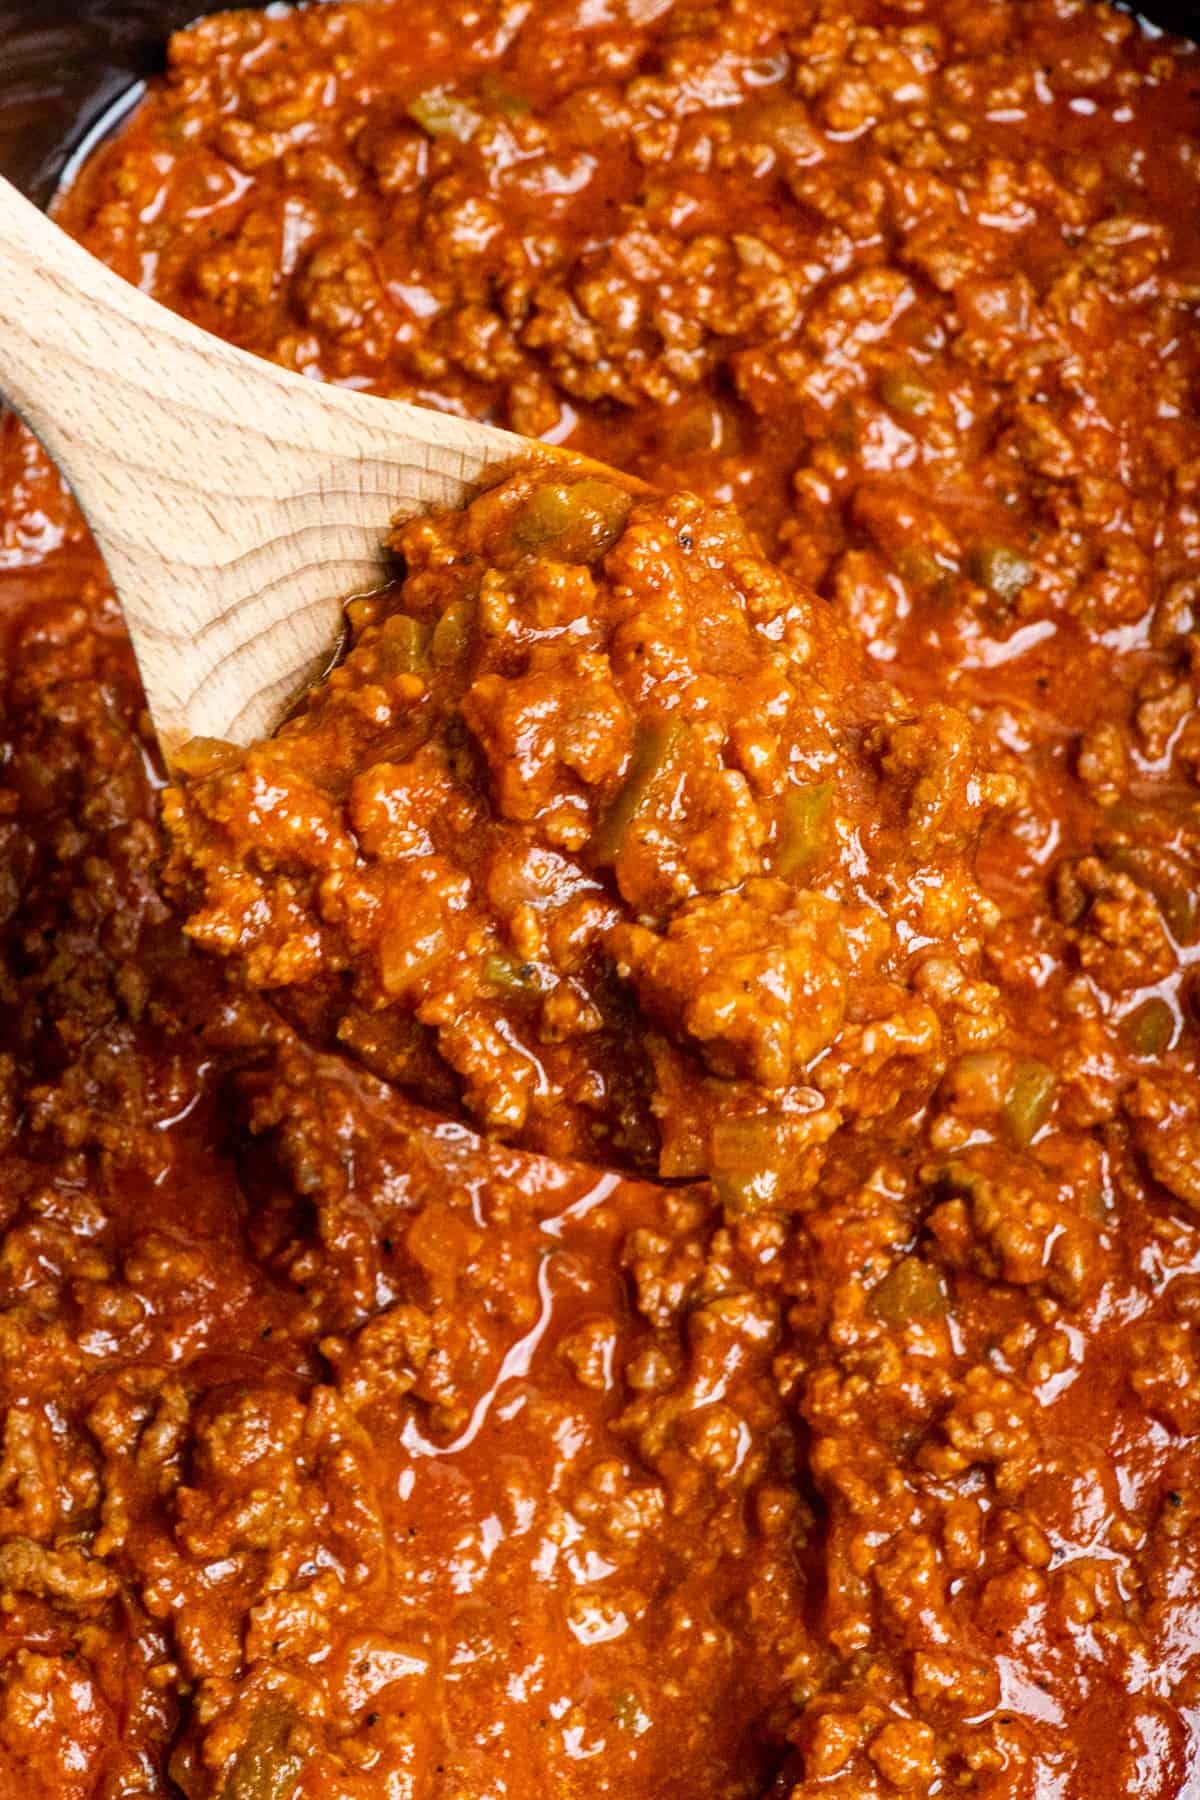 Sloppy joes on a wood spood over a slow cooker.